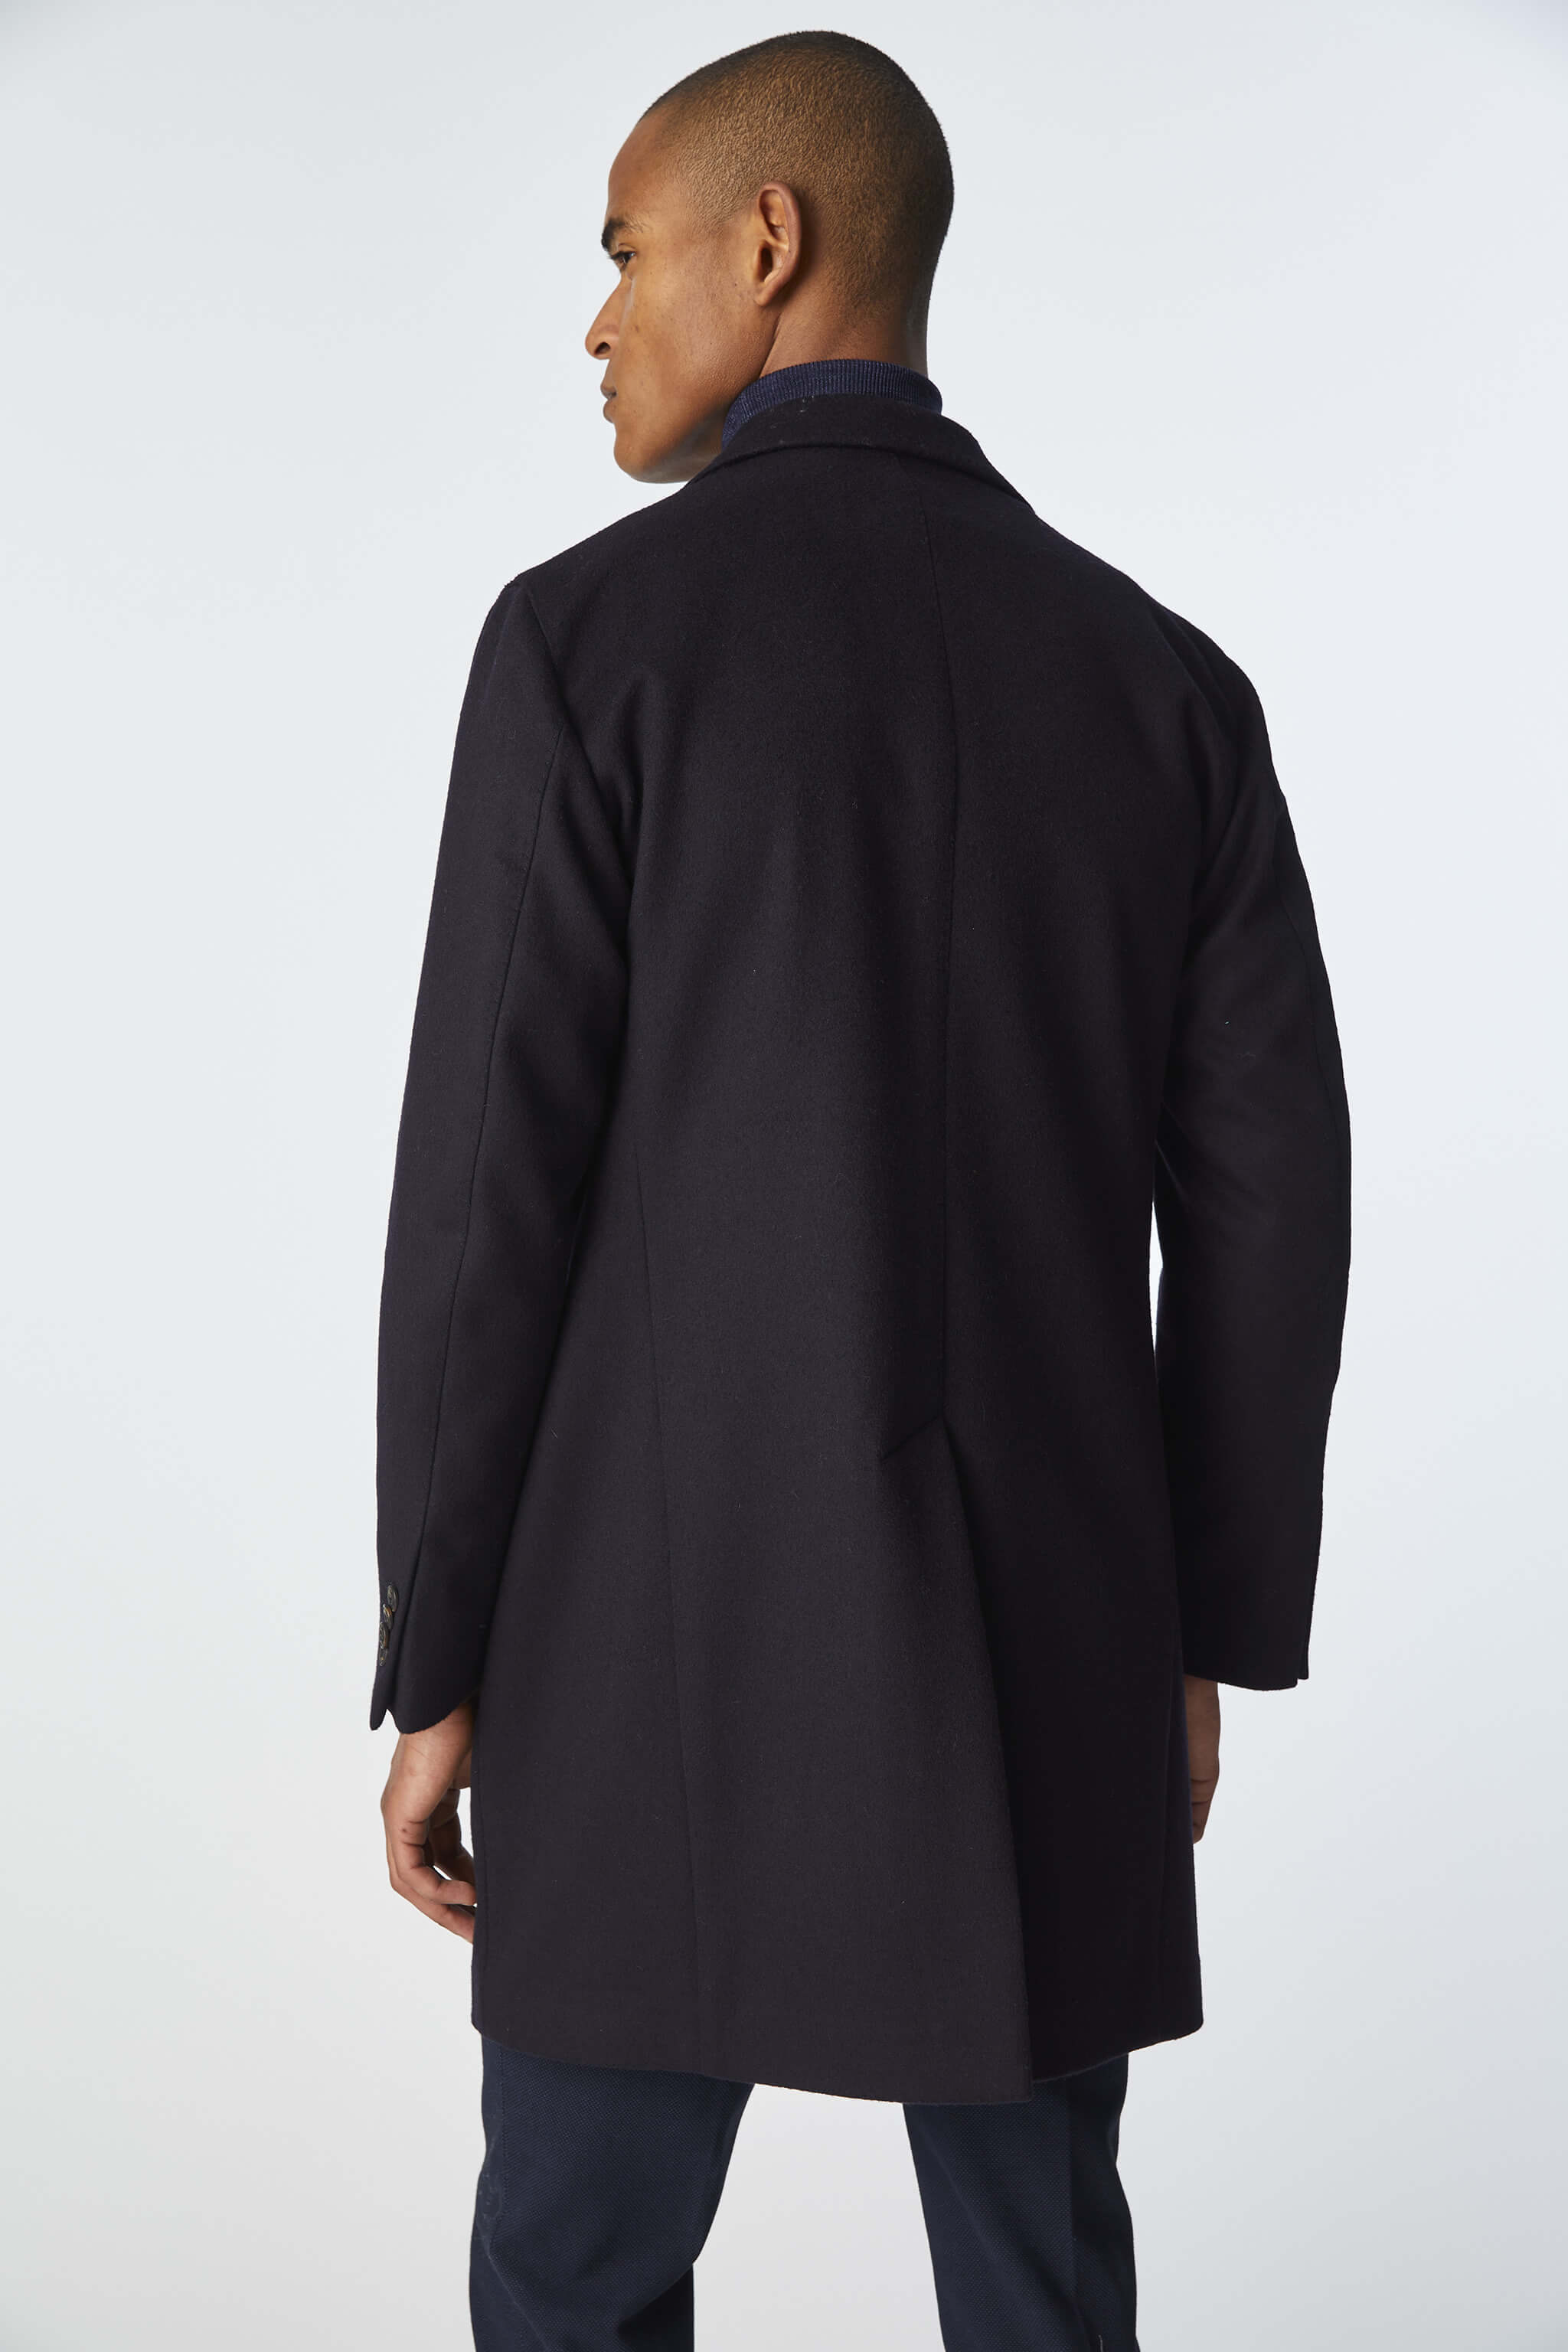 Garment-dyed coat in midnight blue